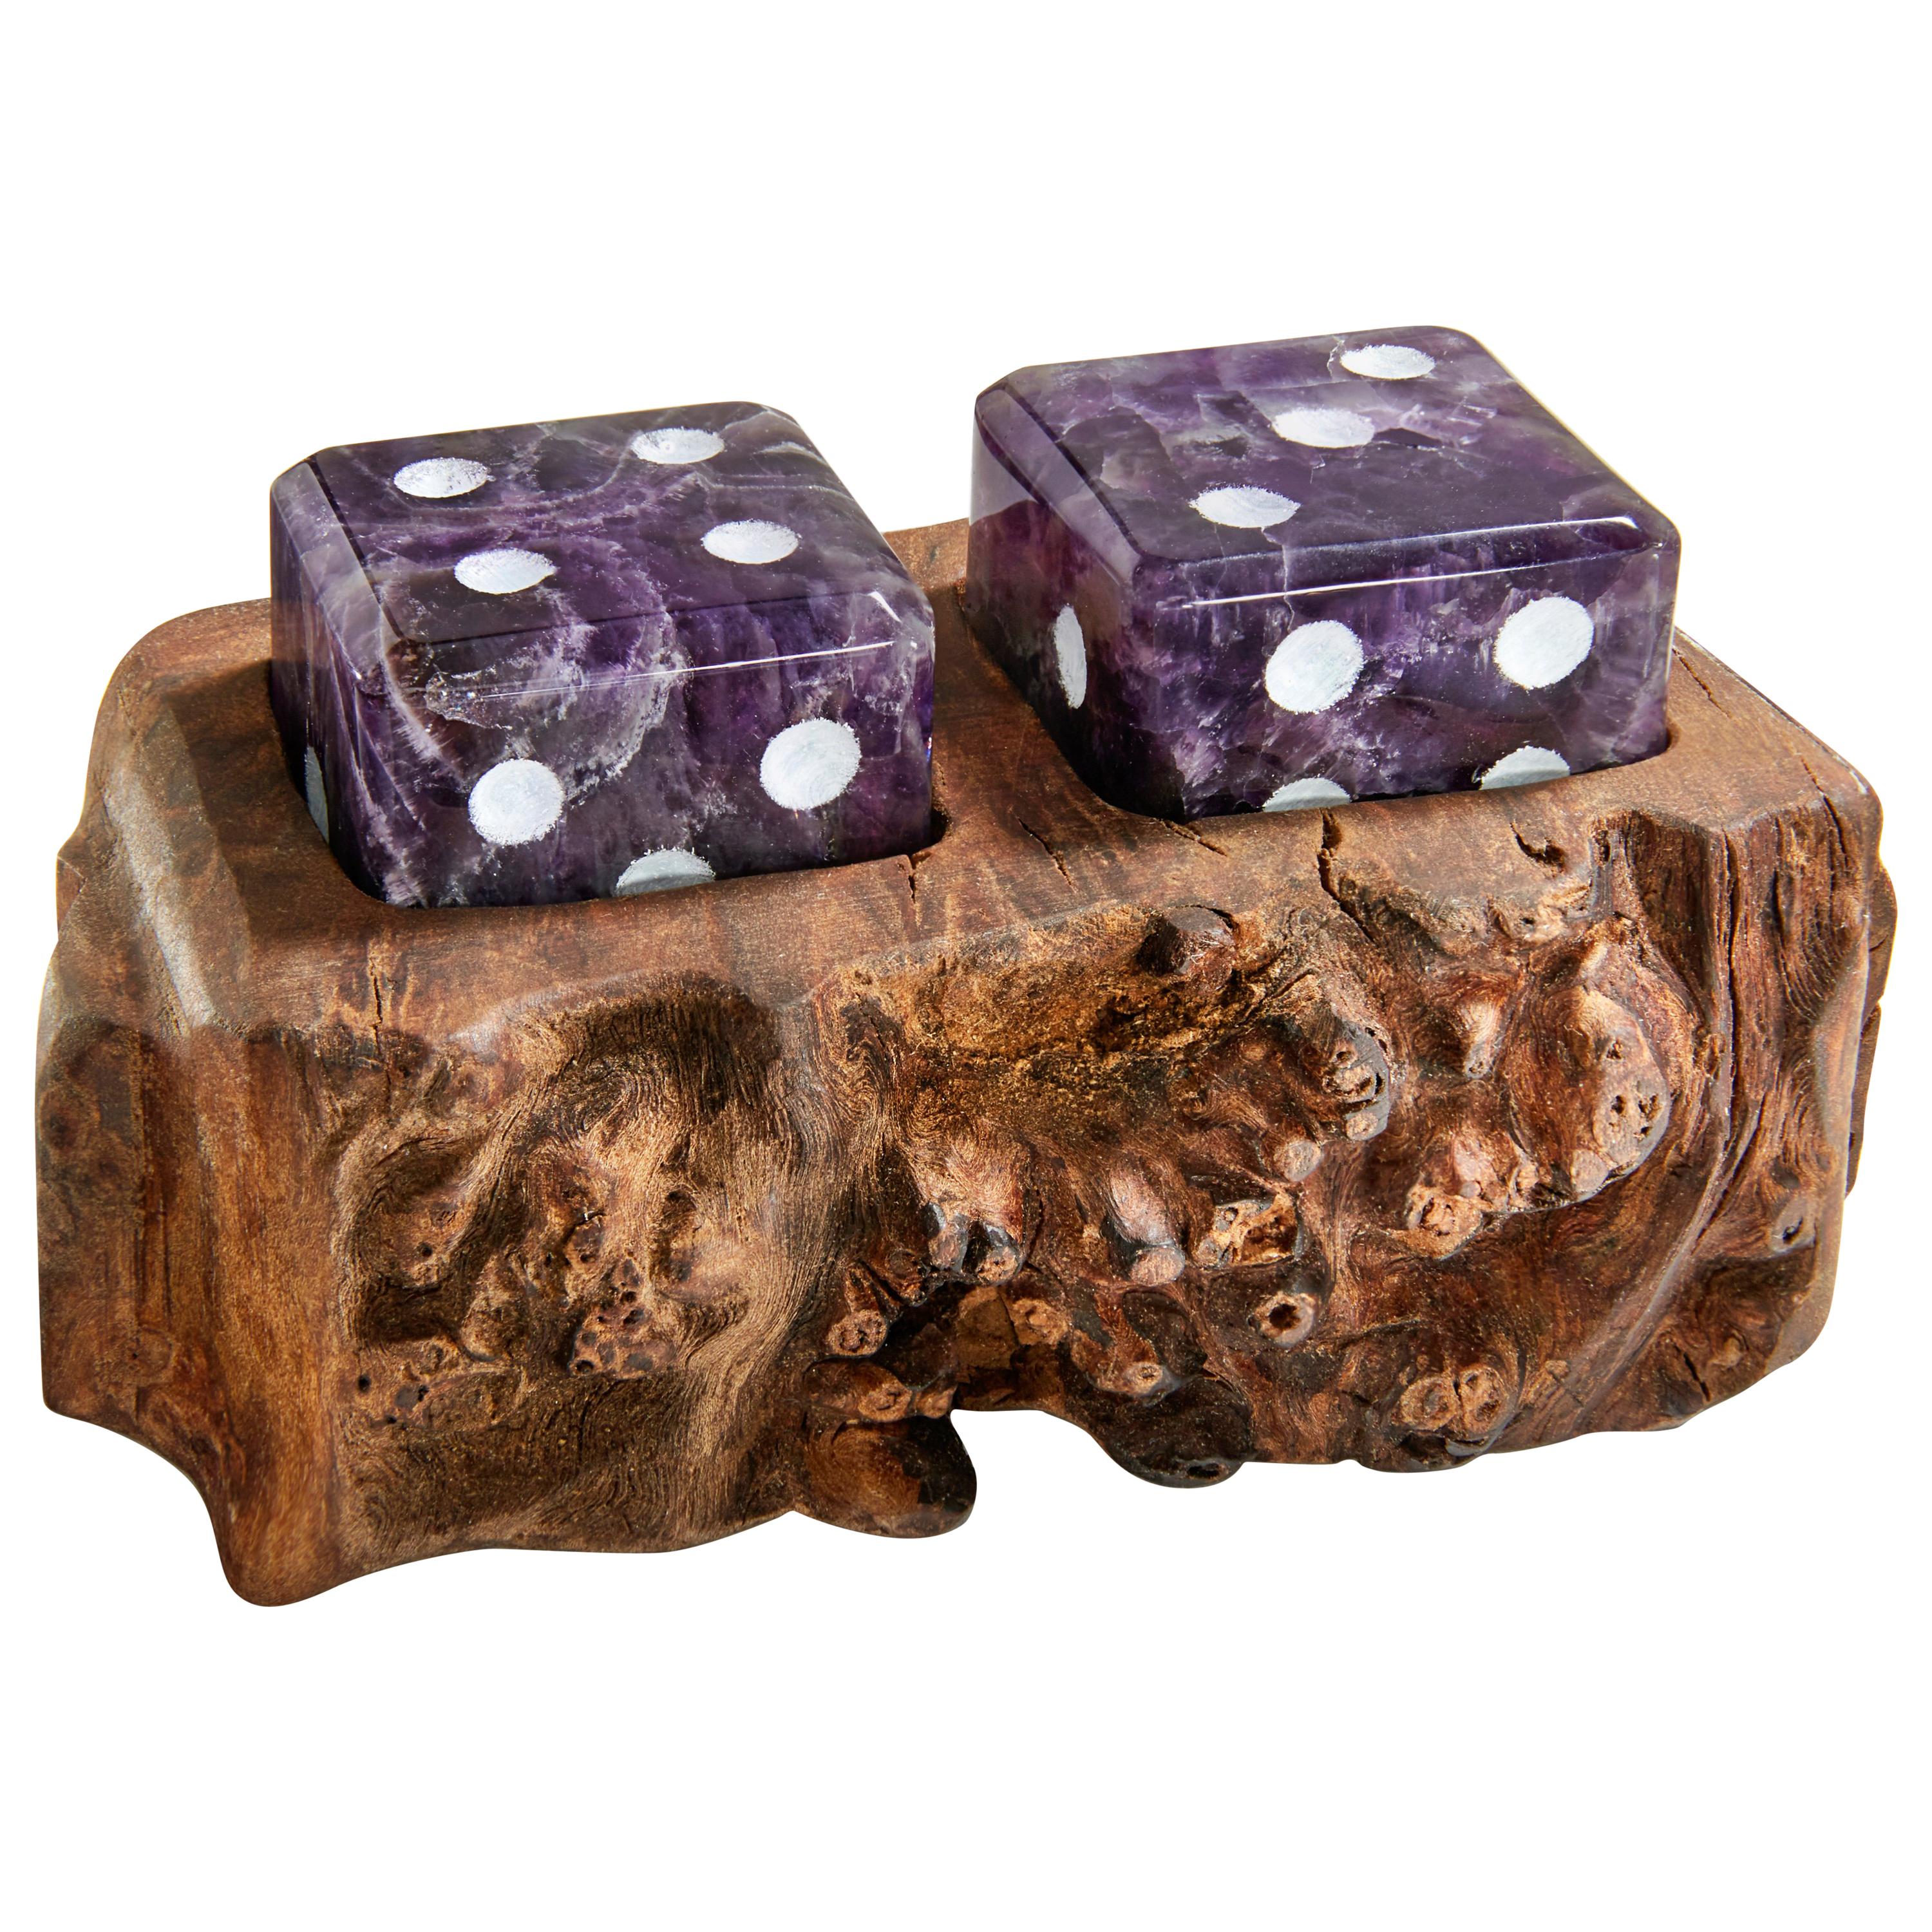 Afora Dice Set in Amethyst with Wood Holder by ANNA New York For Sale